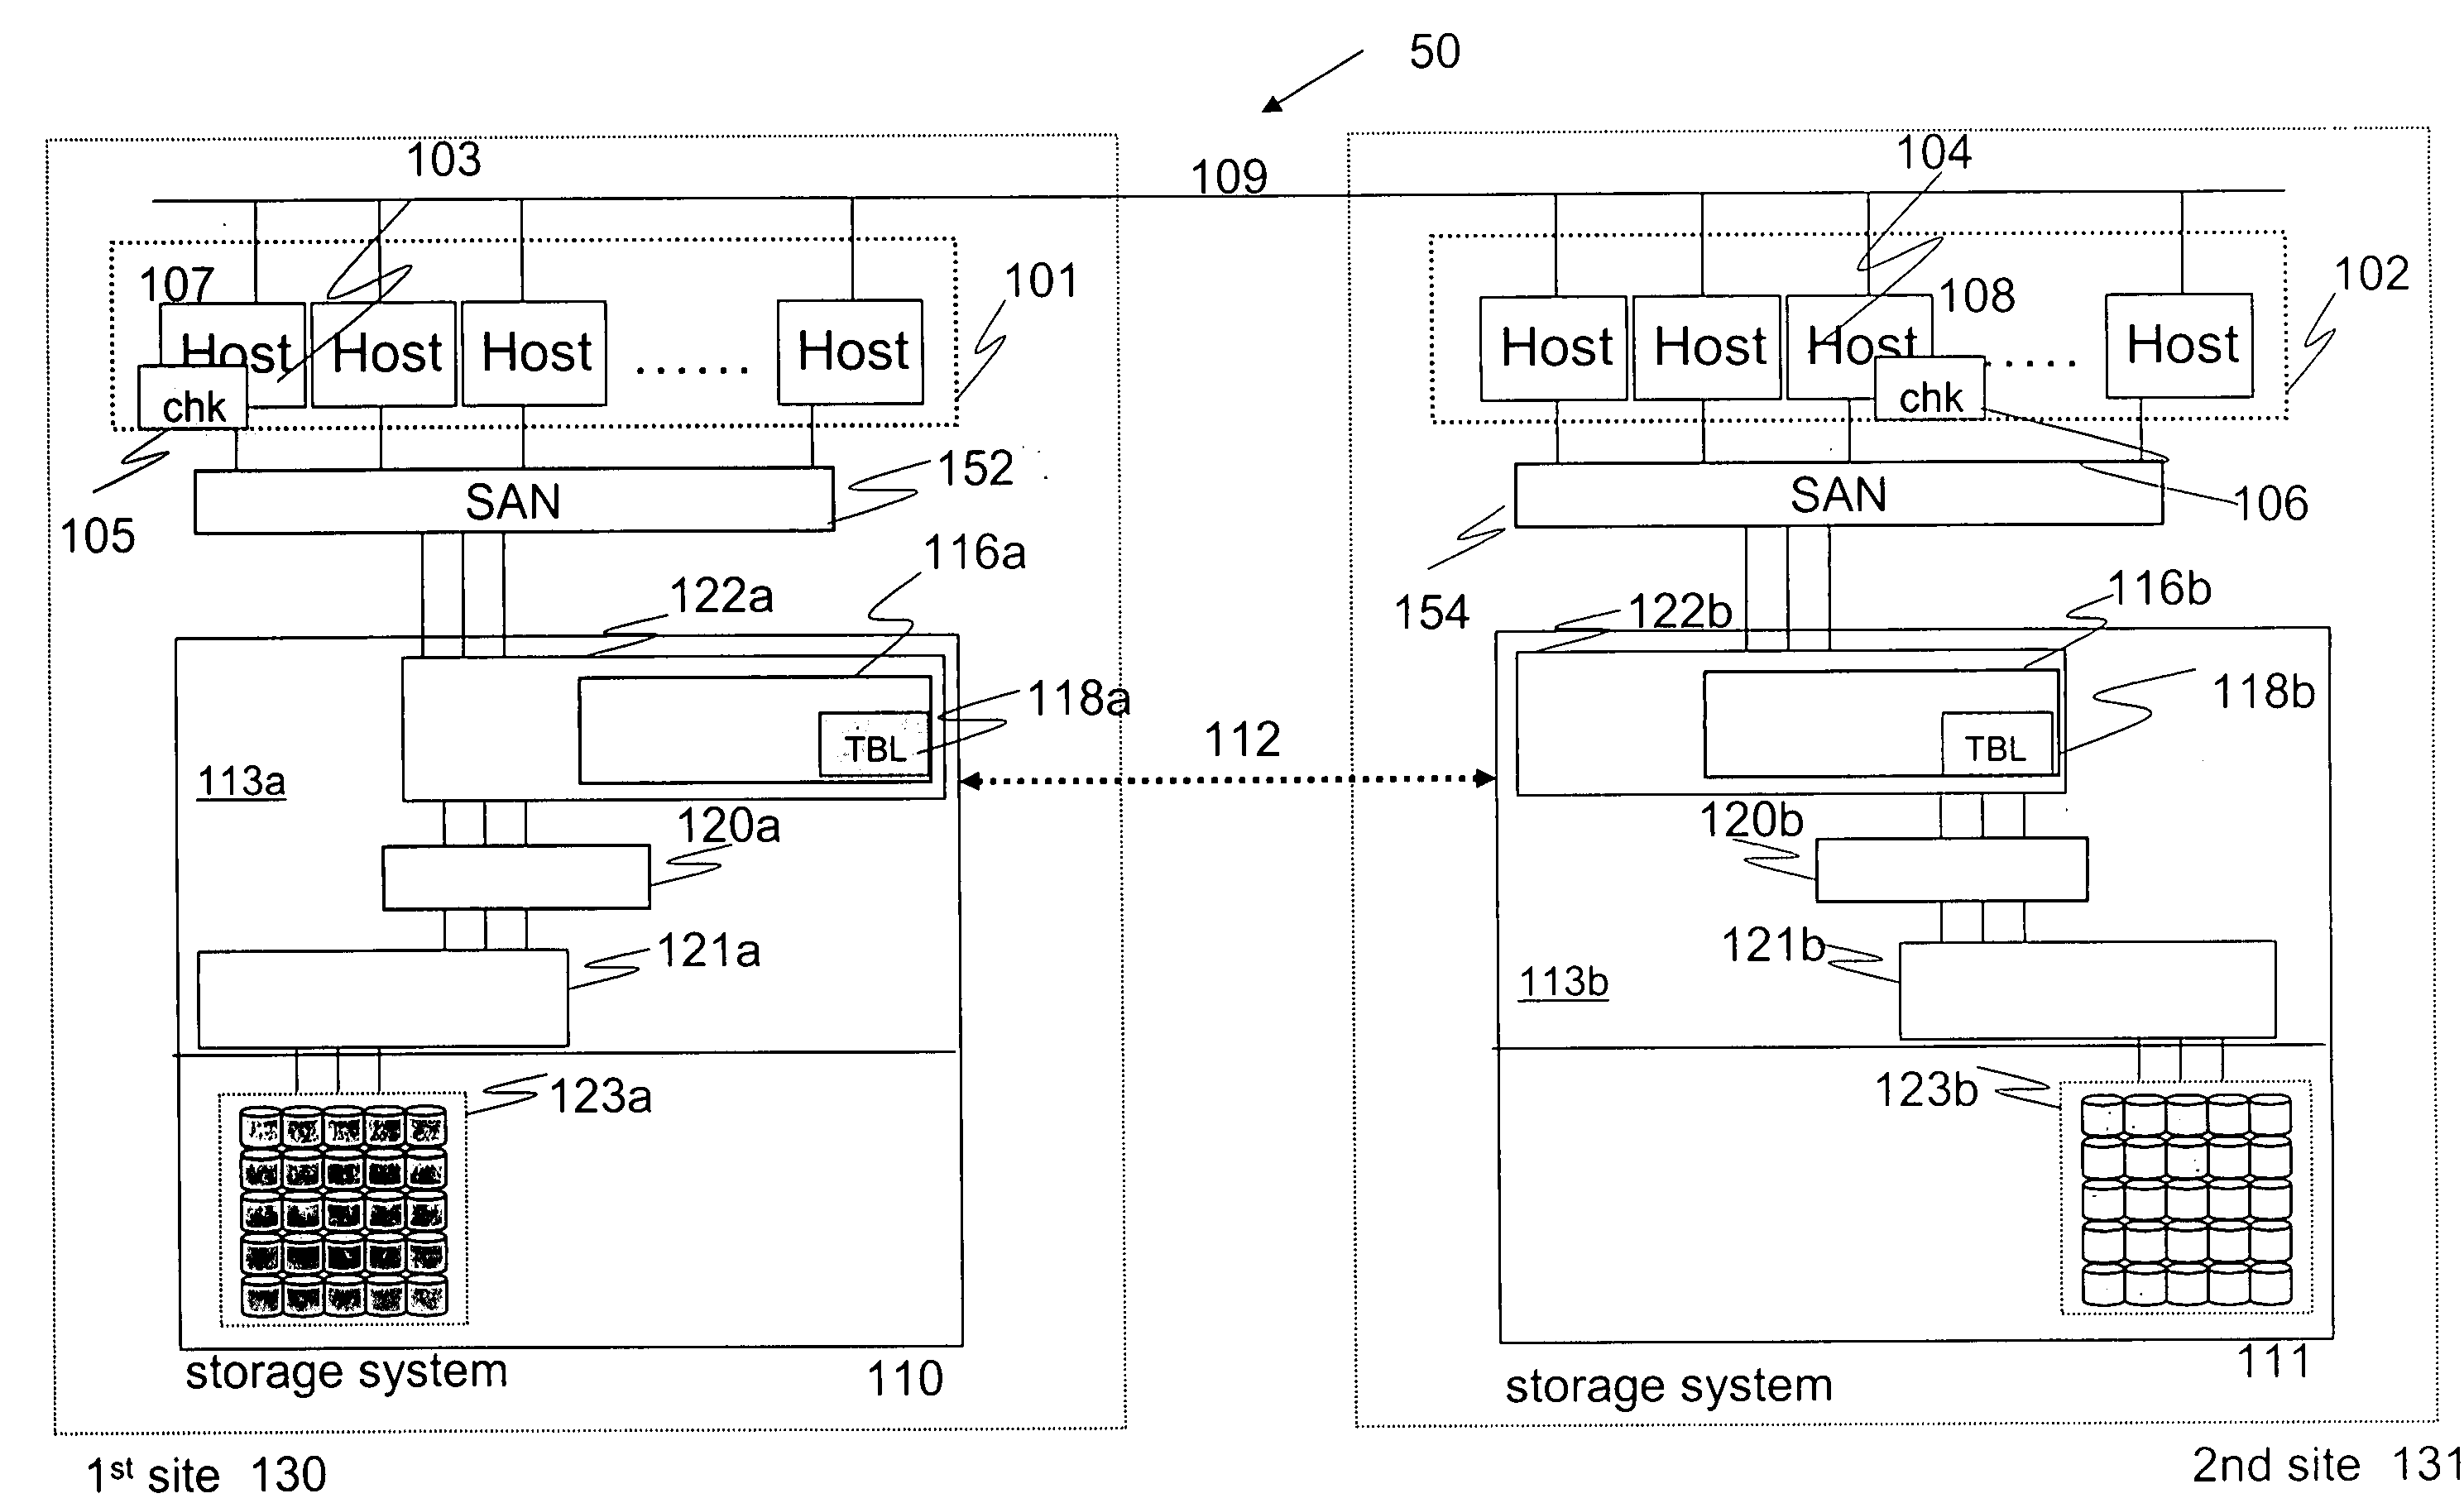 Apparatus and method of heartbeat mechanism using remote mirroring link for multiple storage system